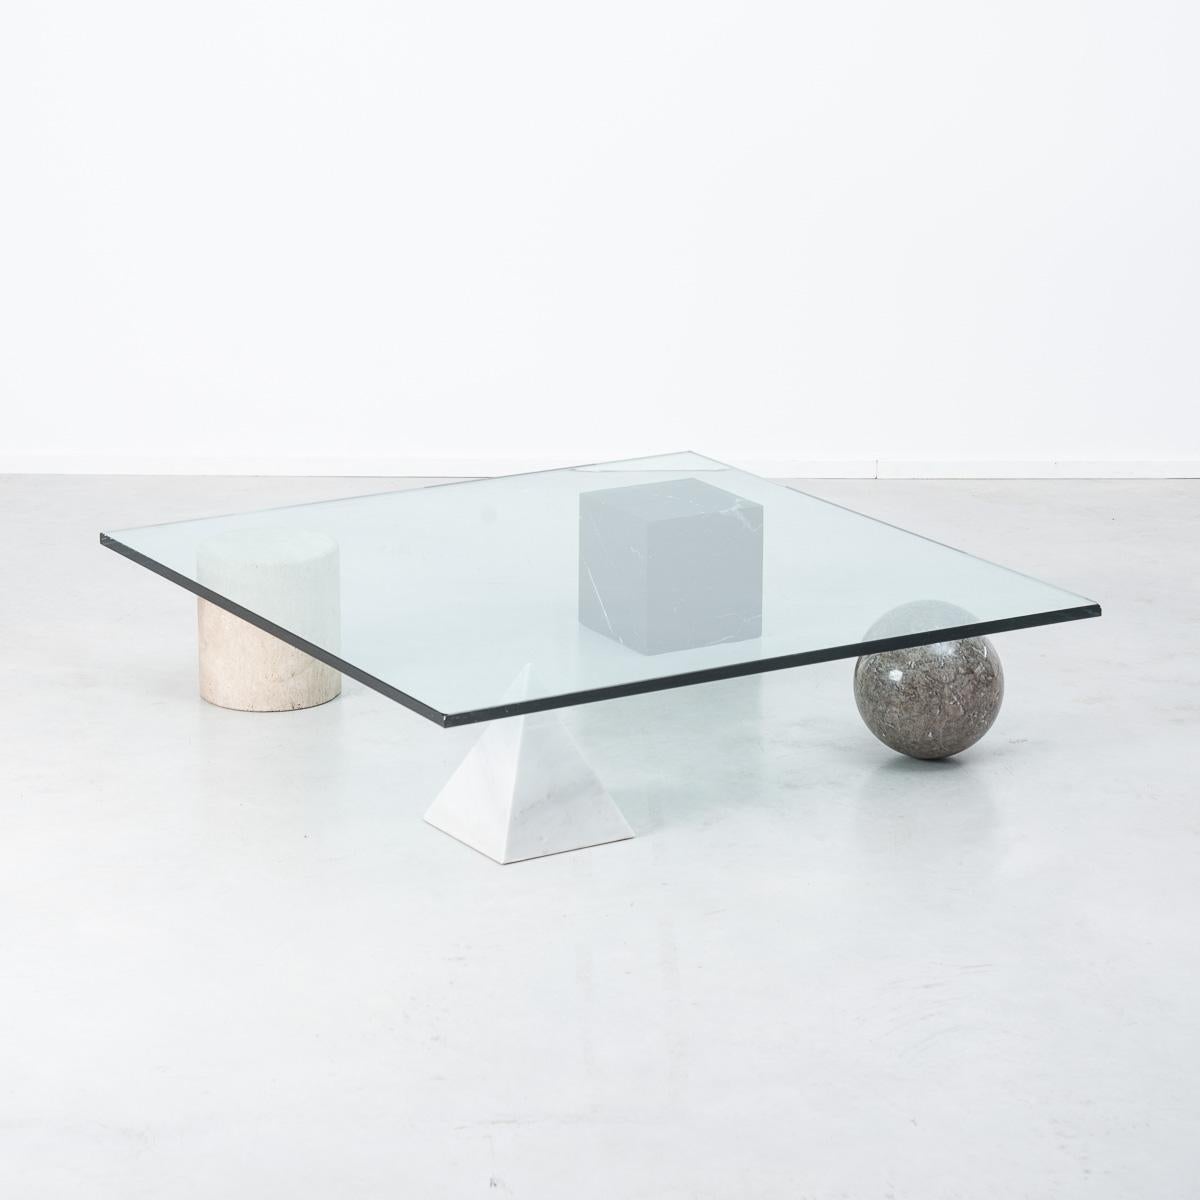 A stunning and sculptural coffee table inspired by the four forms of Euclidean geometry, the cube, the pyramid, the cylinder and the sphere. The four elements can be positioned freely for a unique composition. 

A stunning and sculptural Metafora